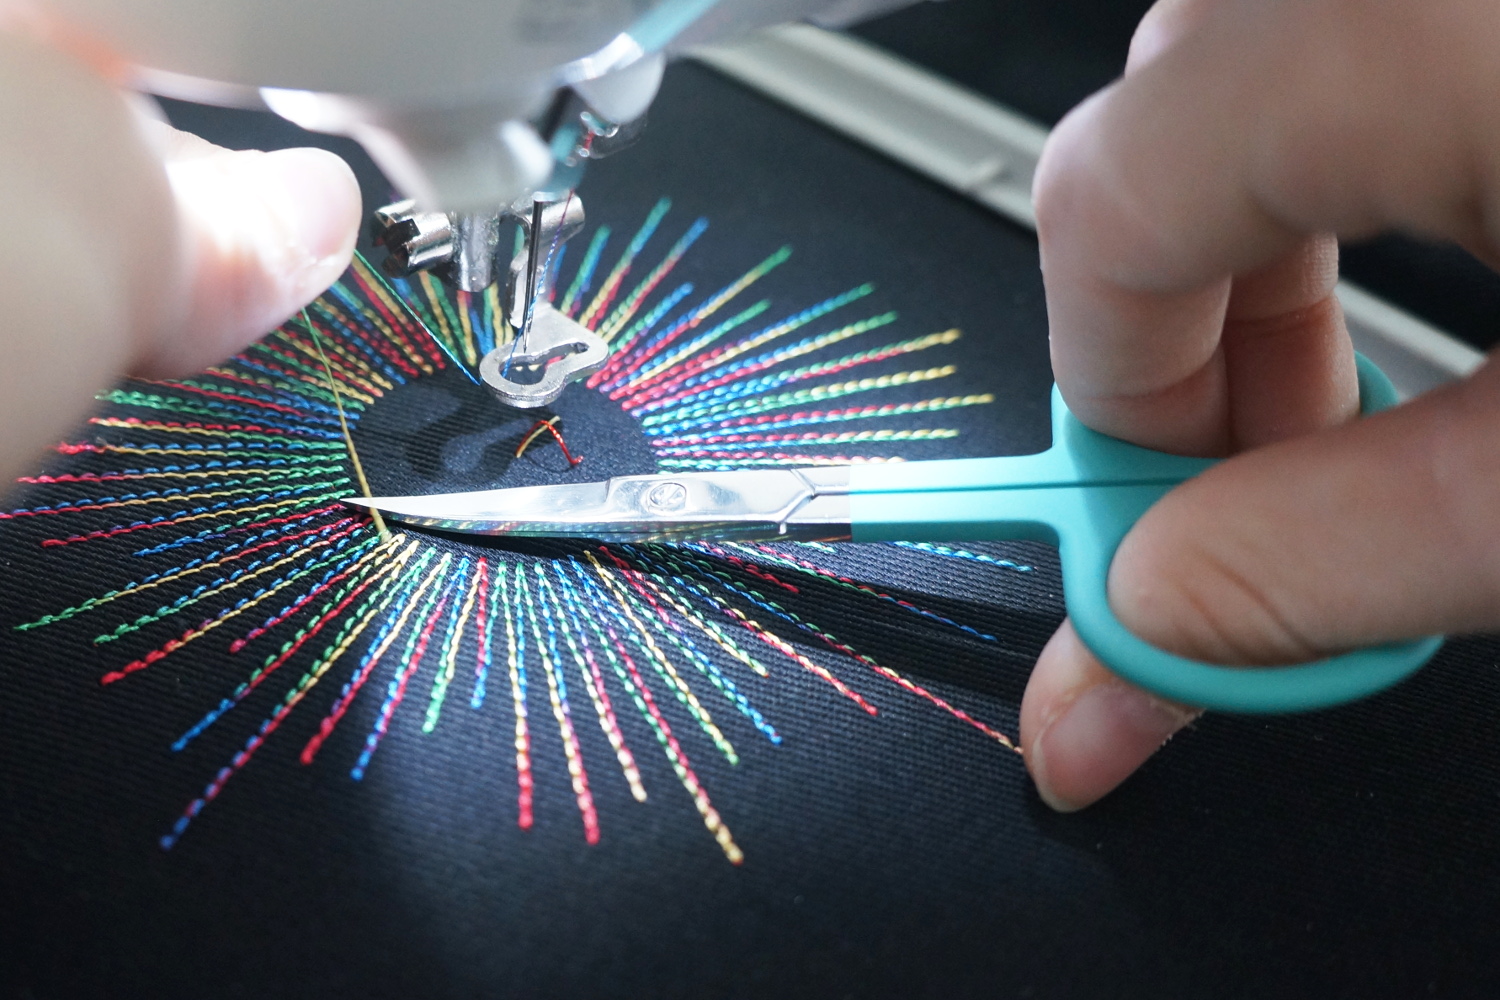 A Fascinating Melting Pot: Embroidery Meets Technology With TurtleStitch